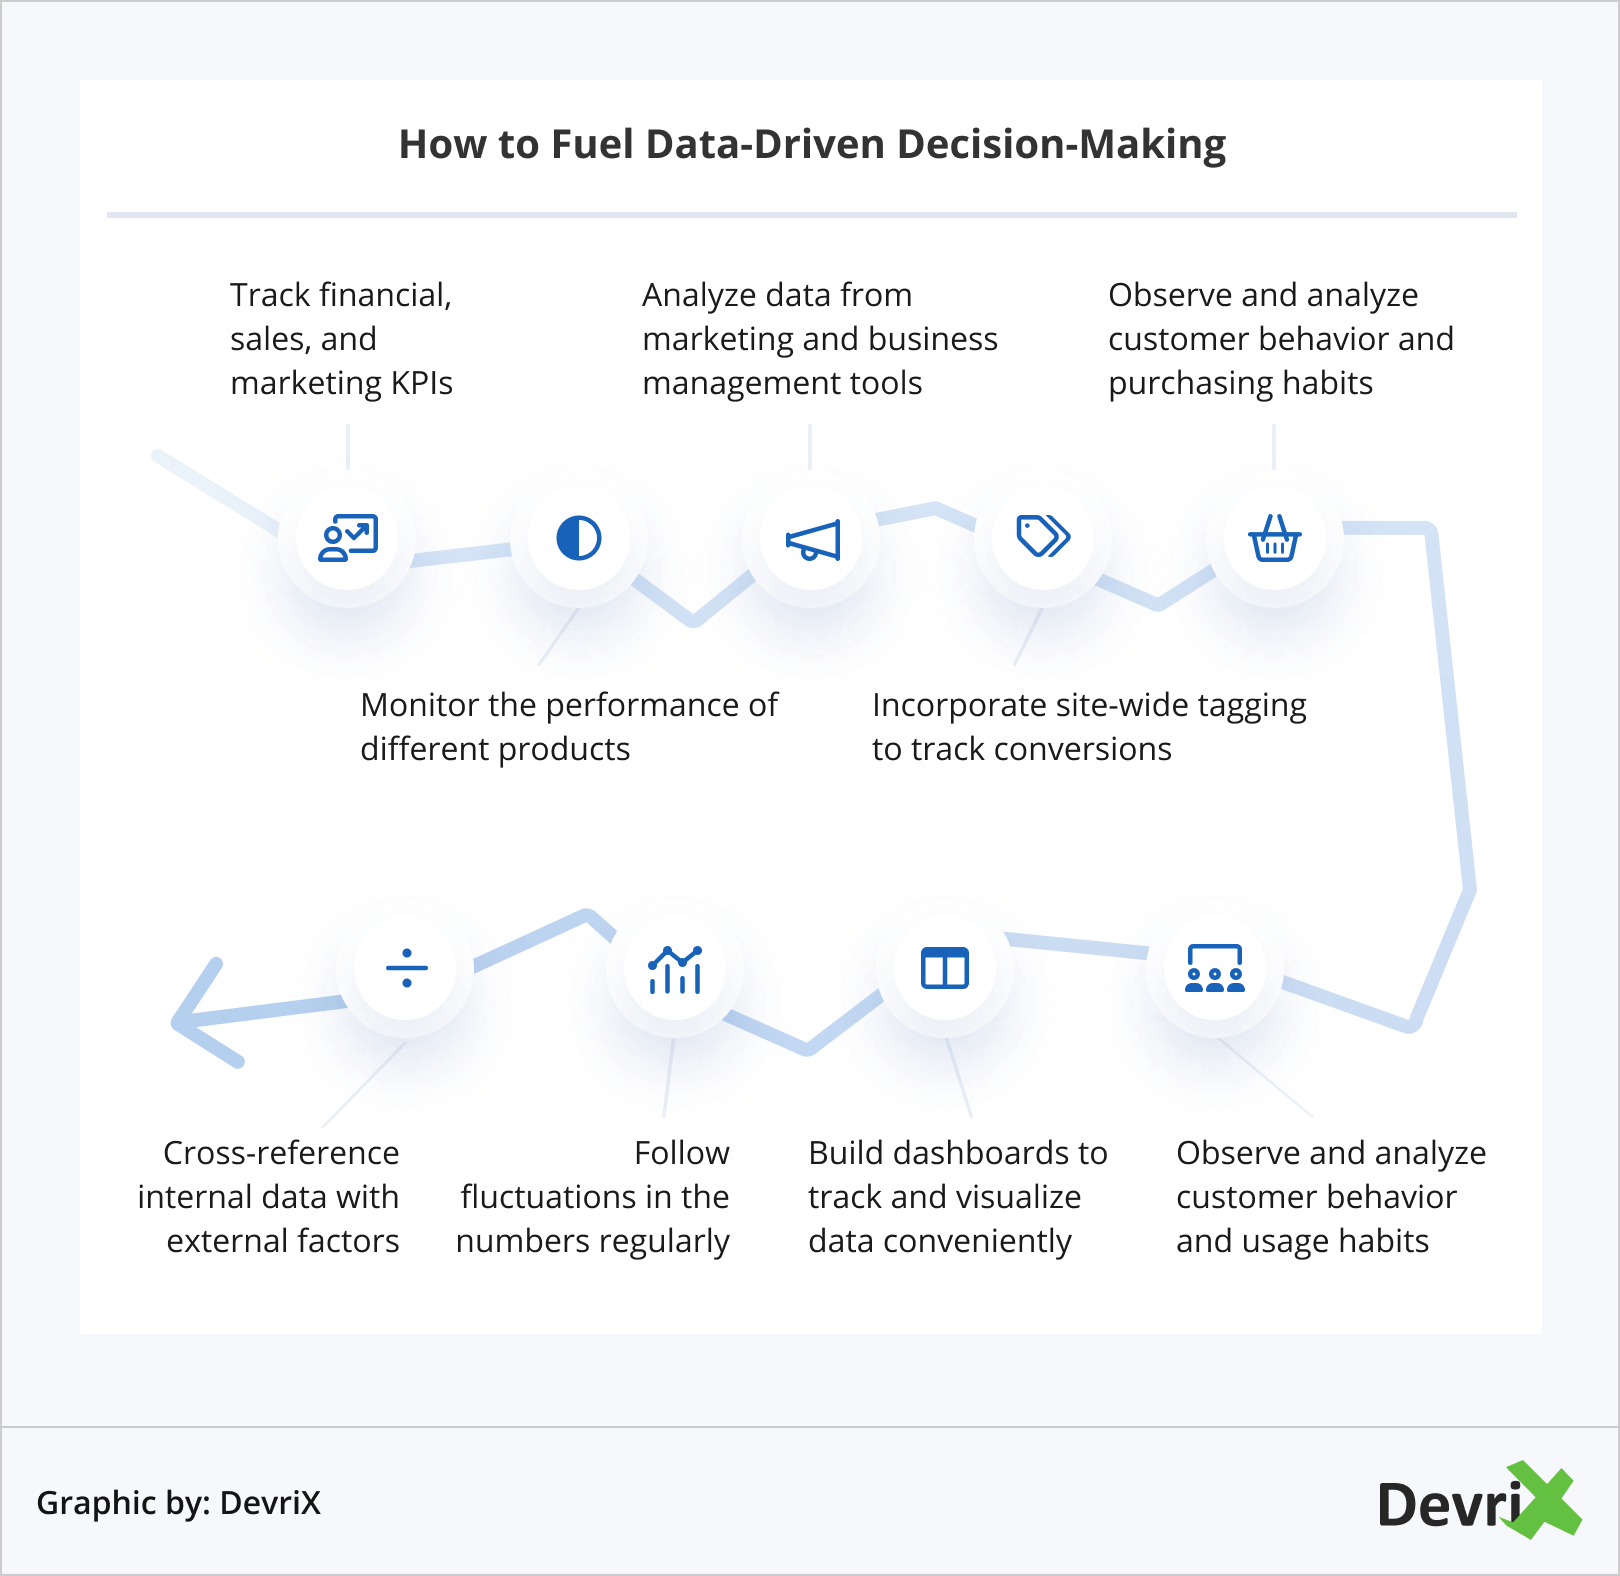 How to Fuel Data-Driven Decision-Making